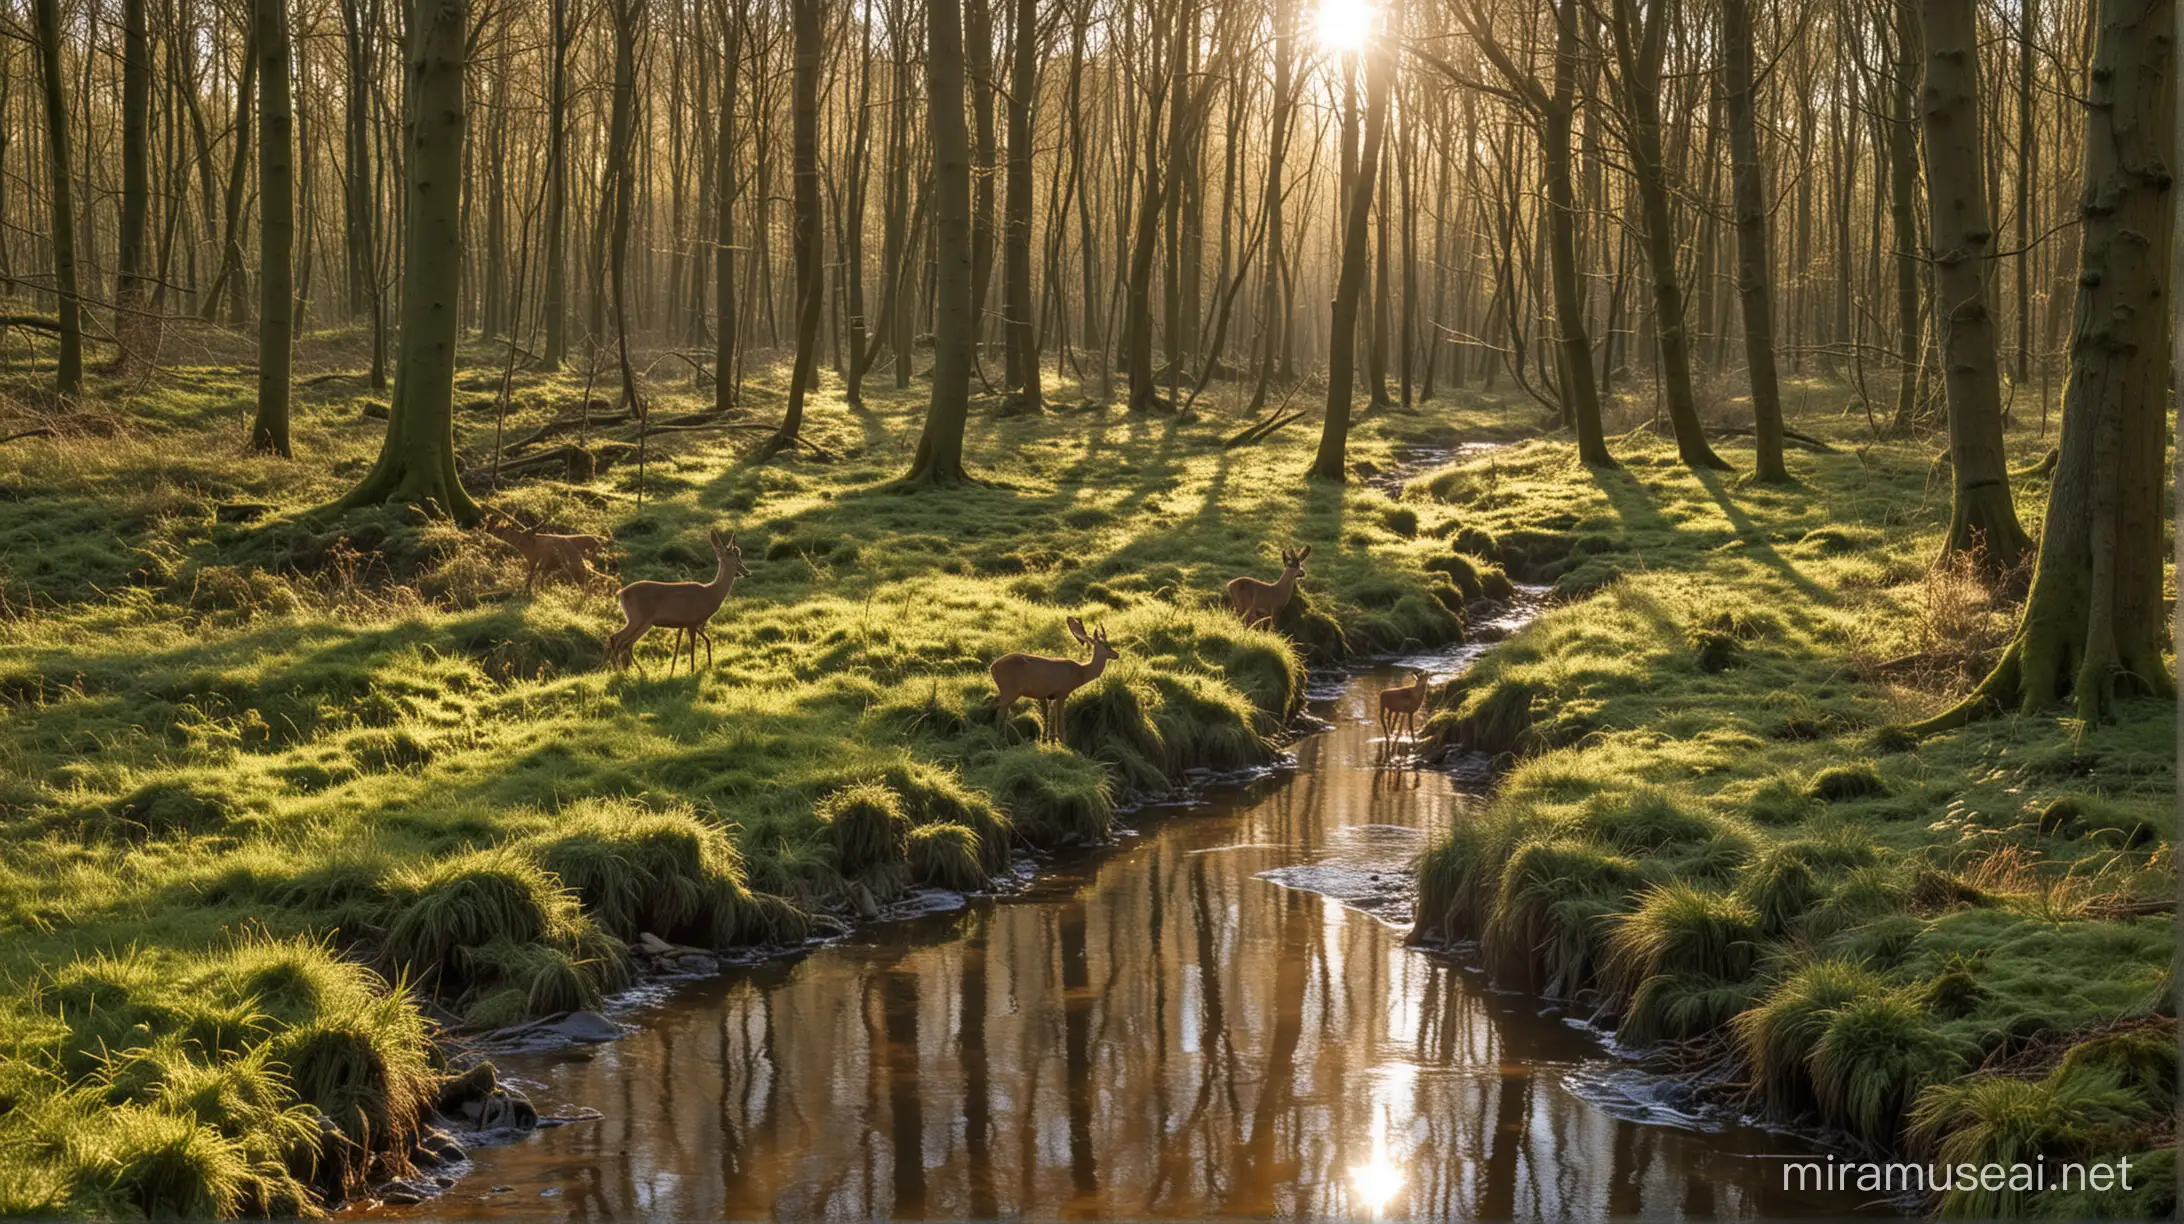 Sunlit Forest Scene with Roe Deer Drinking from Stream